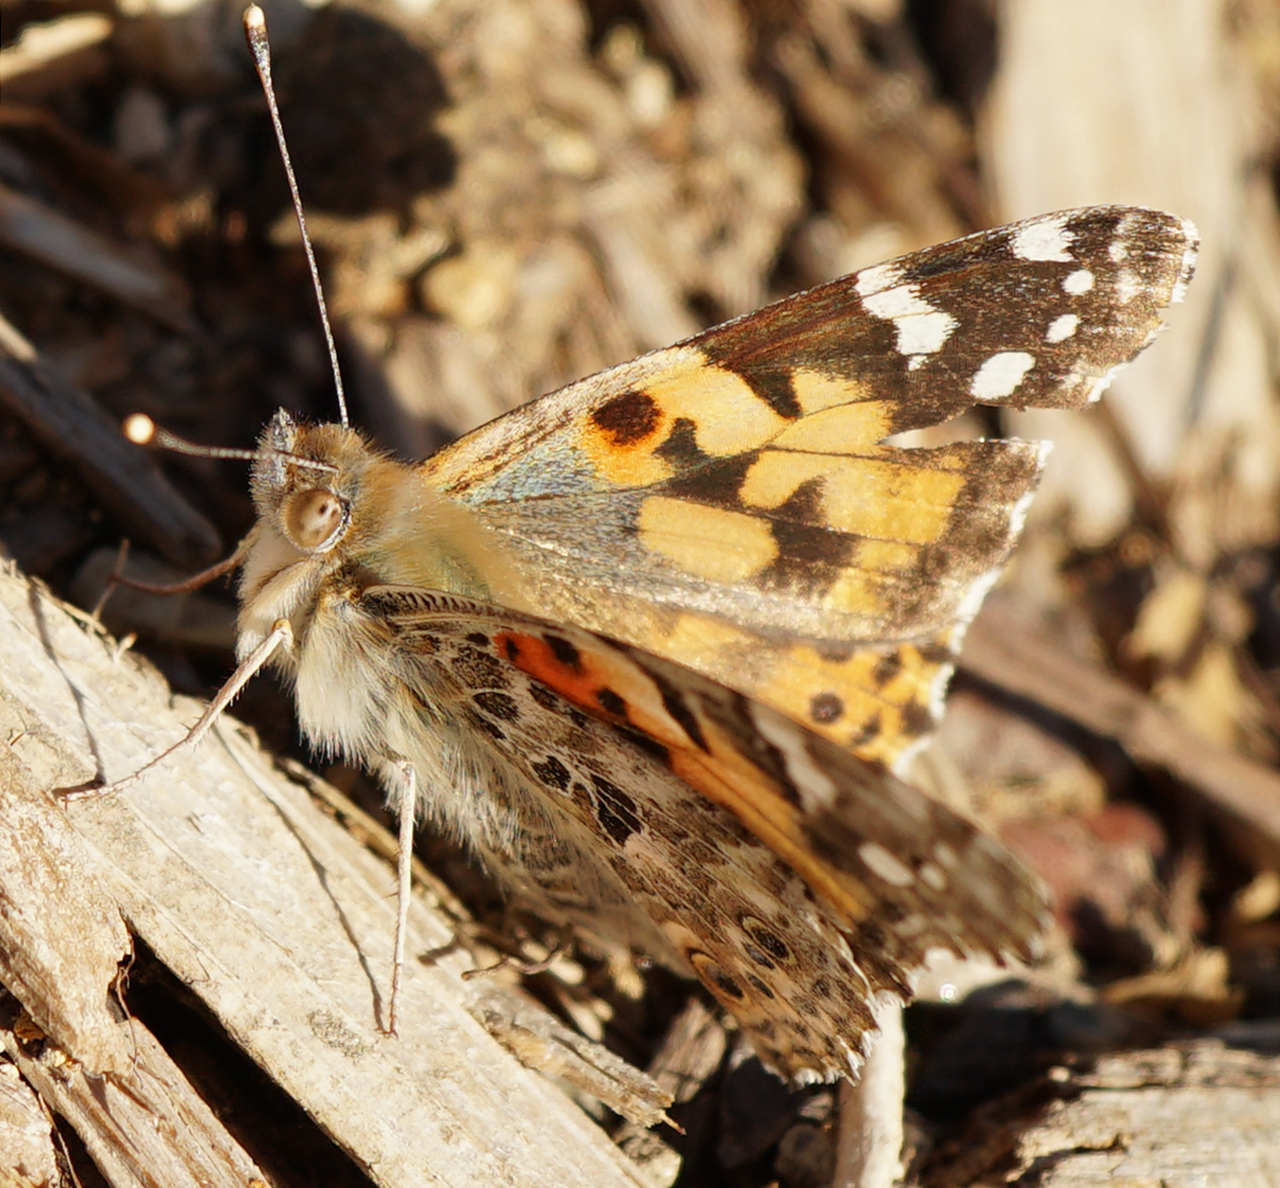 Photo of a Painted Lady whose wings are showing signs of wear